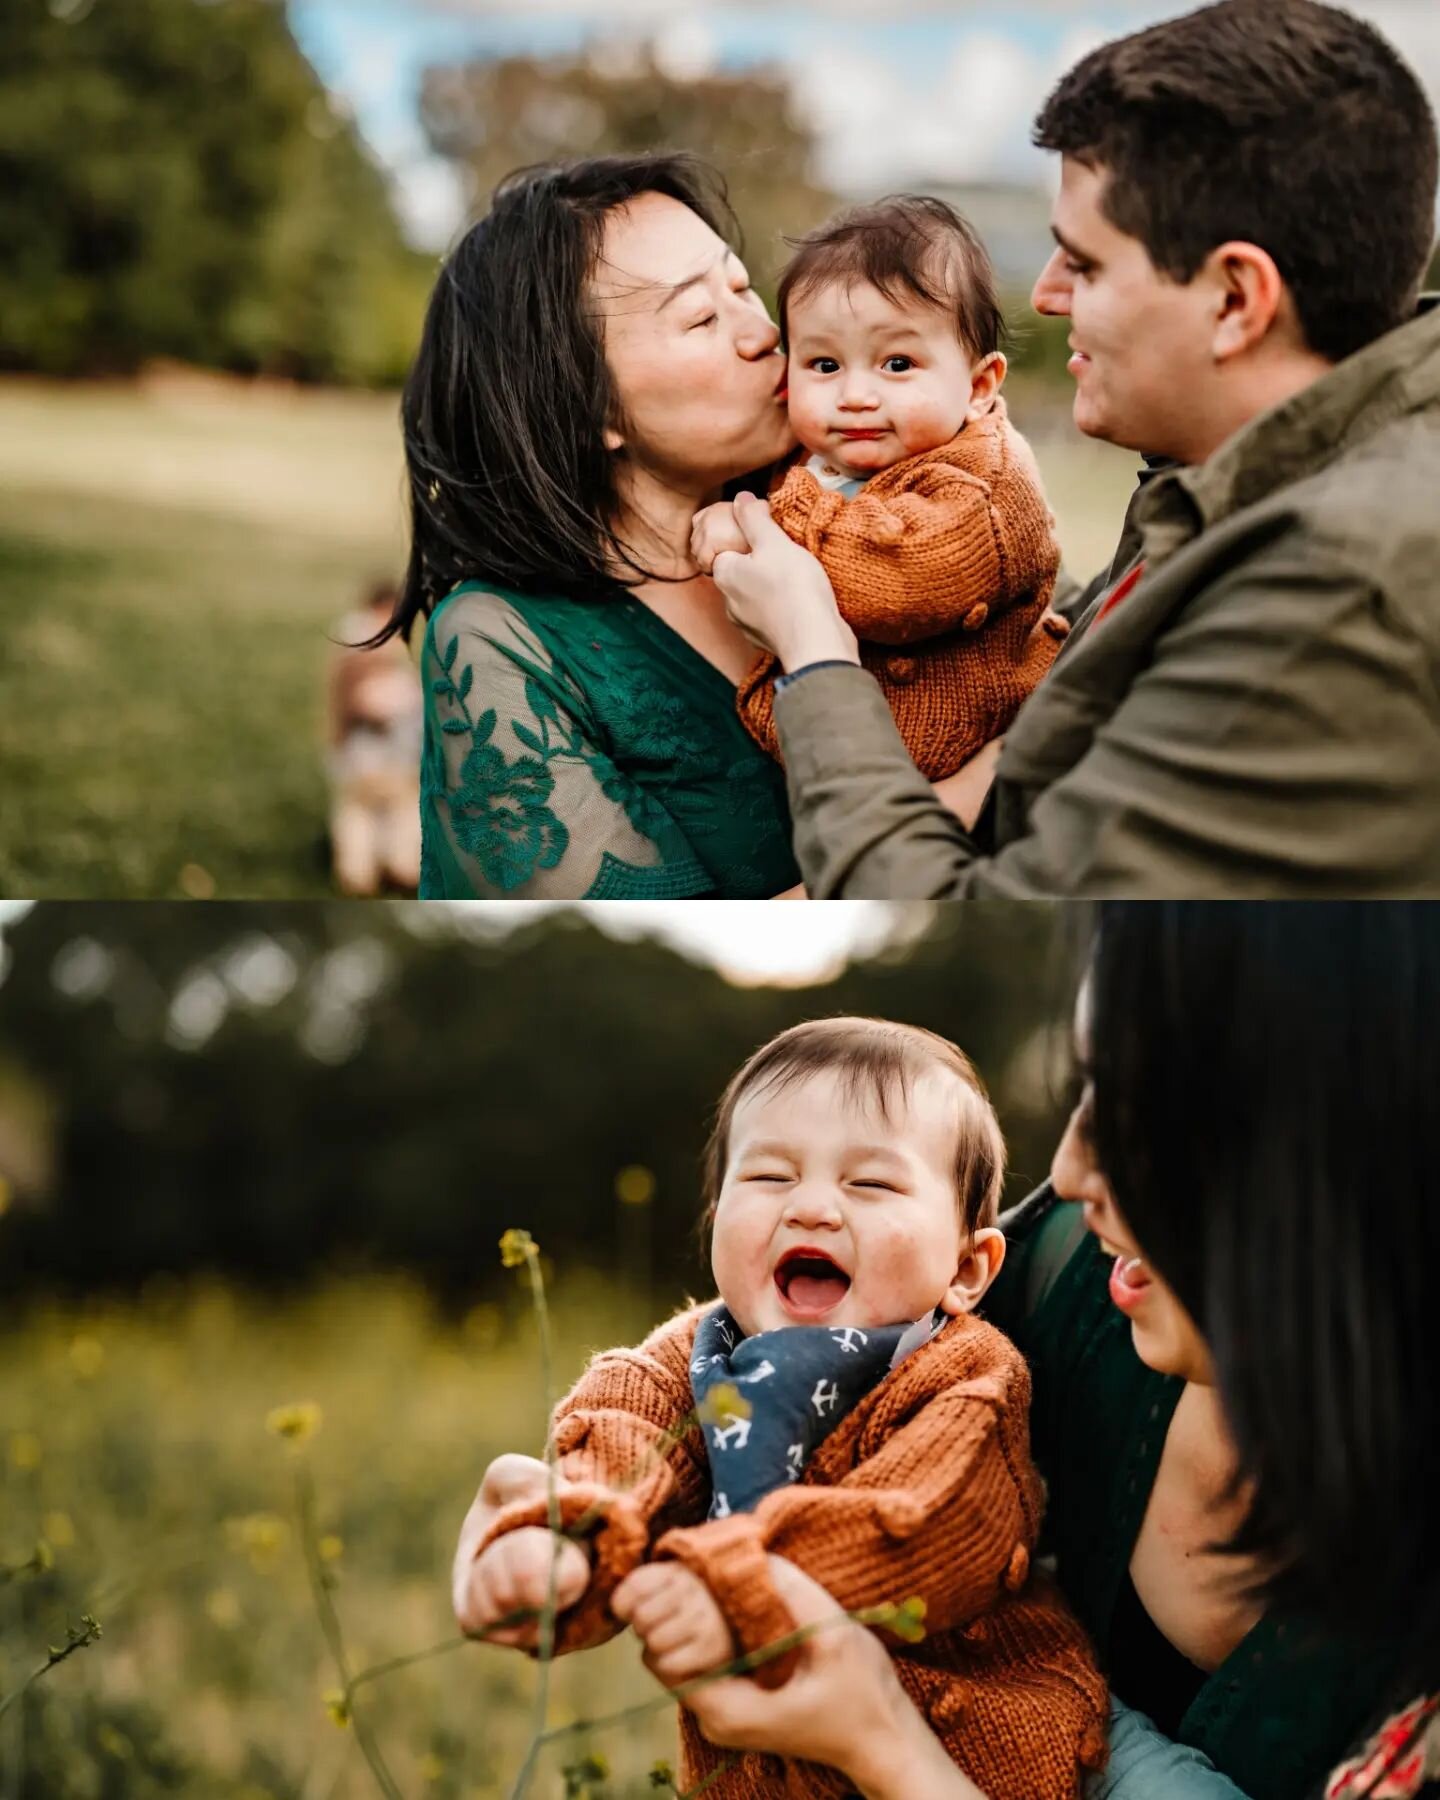 What I really love about family shootings is to capture these beautiful little moments, laughs, hugs, kisses...

#clickproelite
#bayareafamilyphotographer
#sanjosefamilyphotographer
#paloaltofamilyphotographer
#sanjosephotographer⠀⠀
#bayareaphotograp